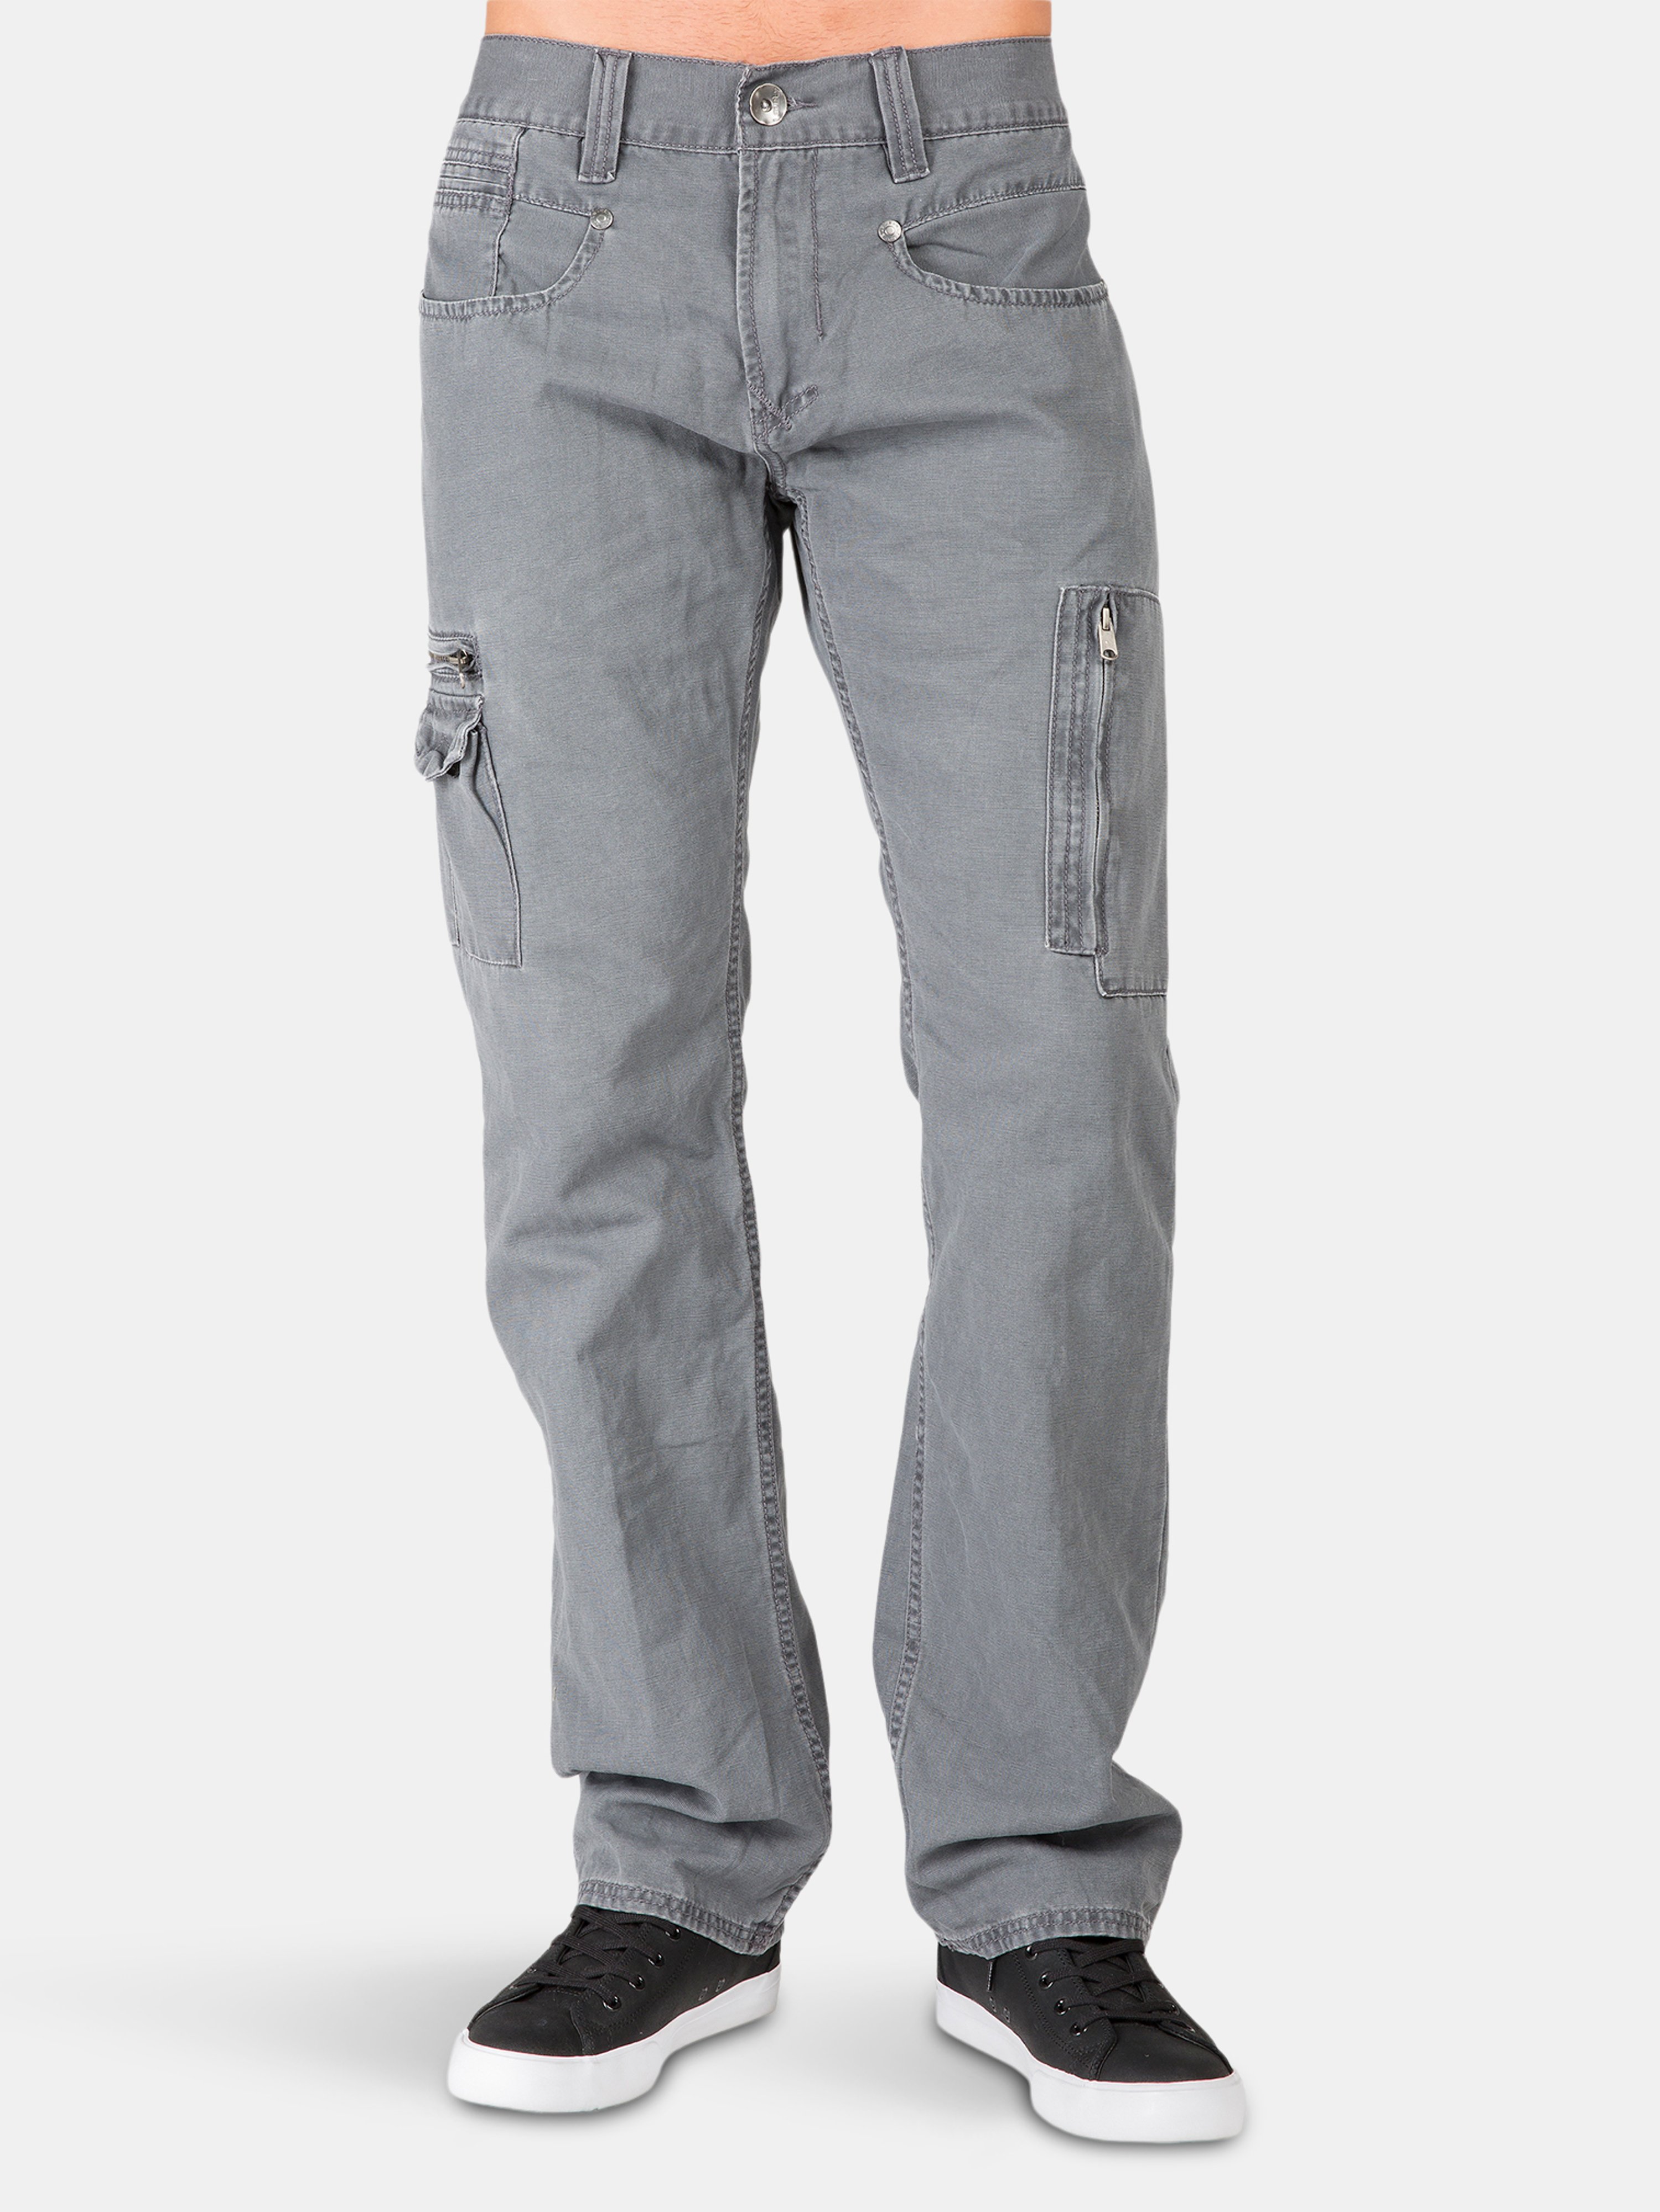 LEVEL 7 LEVEL 7 RELAXED STRAIGHT GRAY CANVAS PREMIUM JEANS CARGO ZIPPER POCKETS